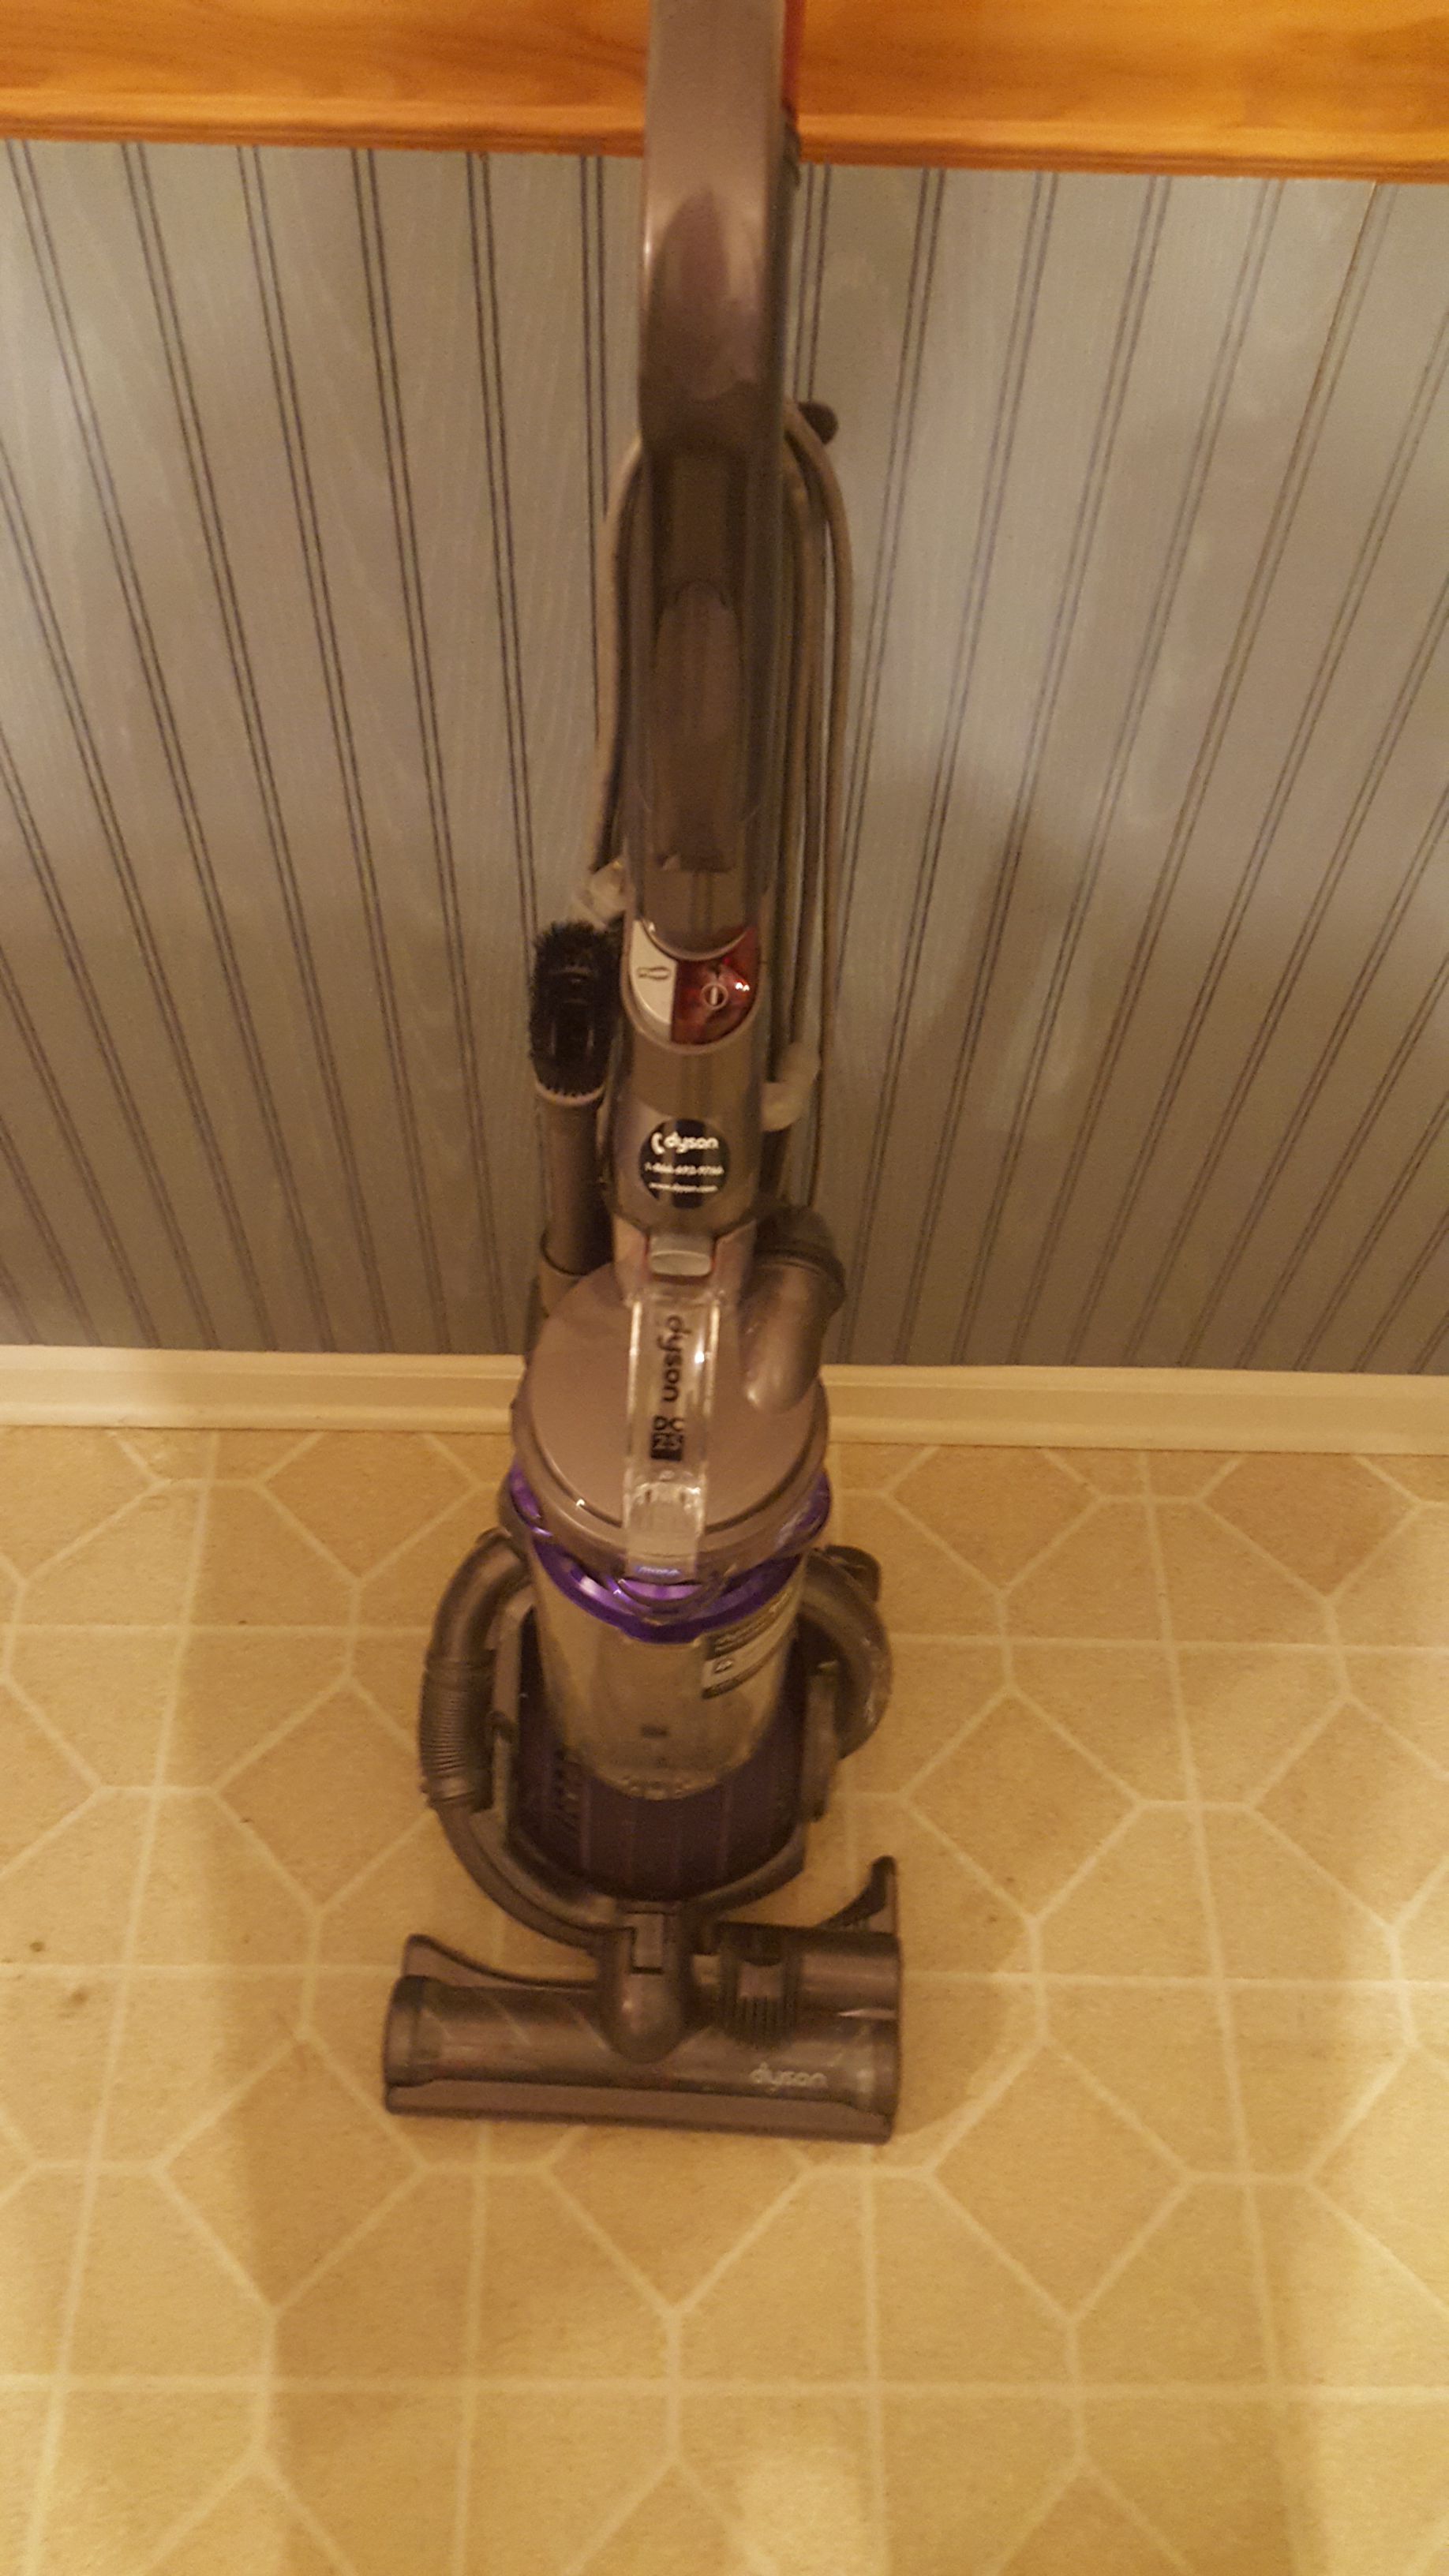 DYSON Dc 25 Animal Ball Vacuum Cleaner SEE MY OTHER VACS I've GOT OVER 85 VACS FOR SALE